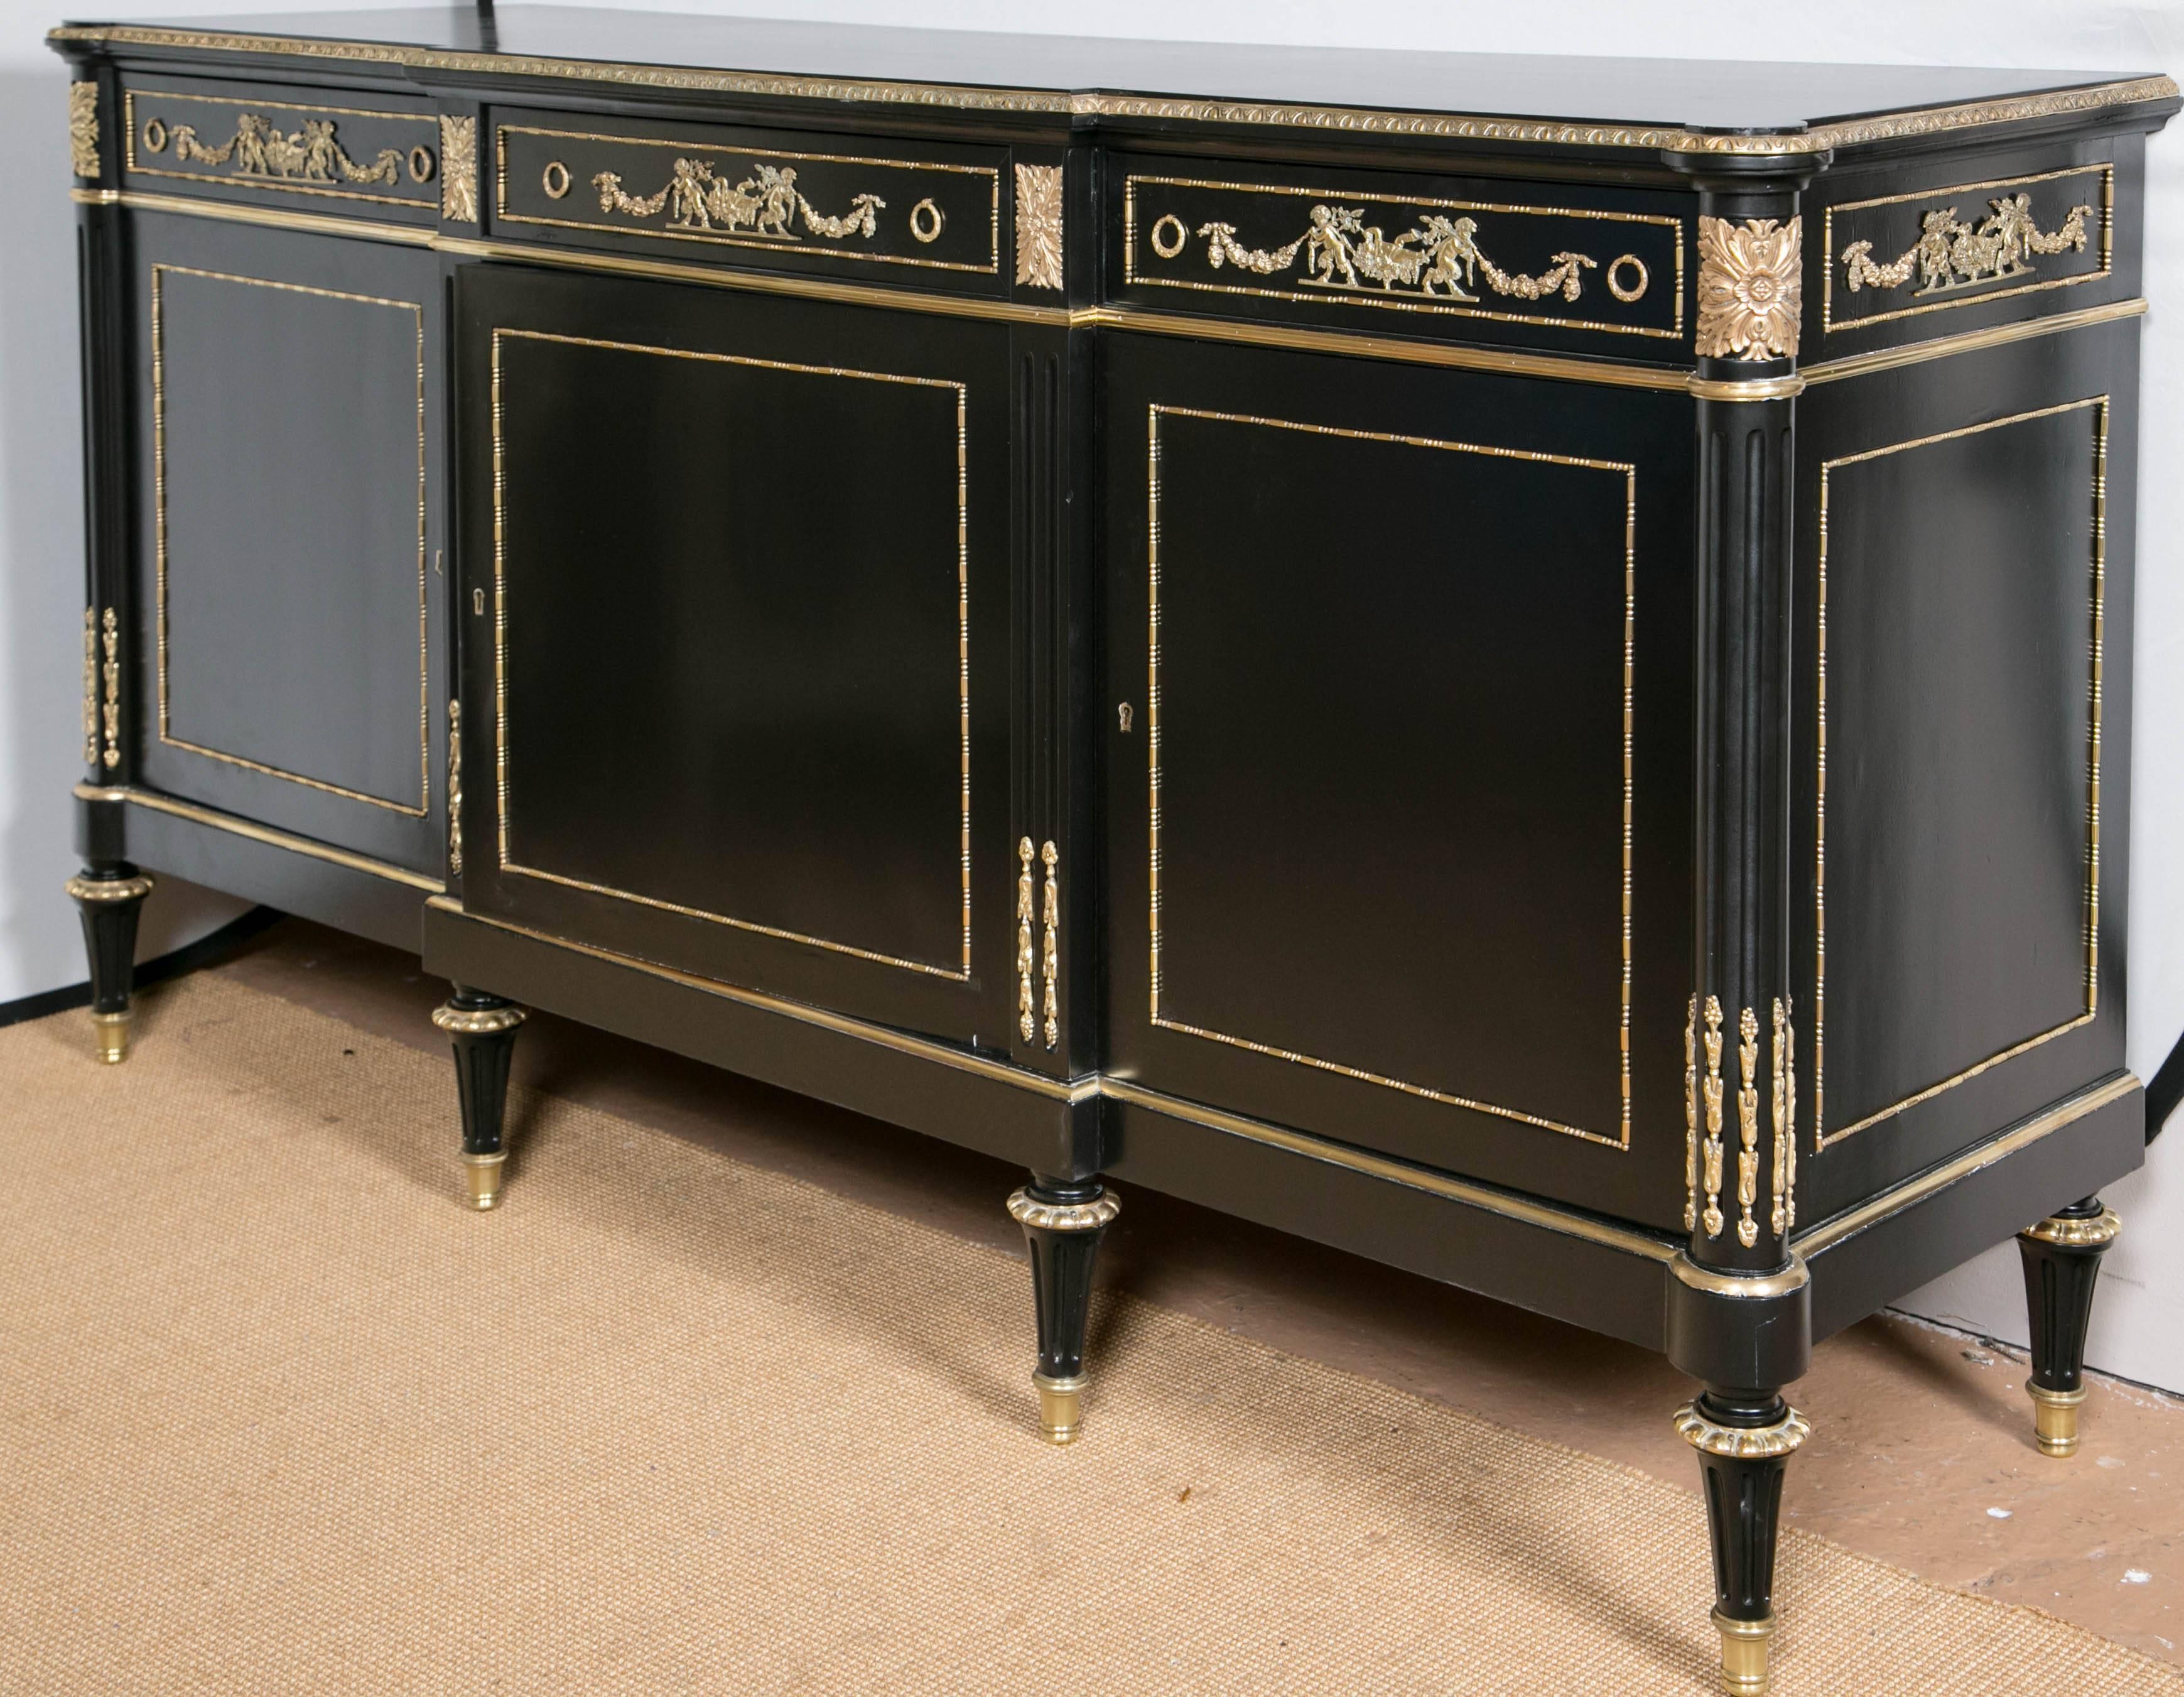 Louis XVI style sideboard by Maison Jansen. A spectacular bronze-mounted cabinet by Maison Jansen. The bronze sabots on tapering legs terminating in bronze caps supporting a finely chiseled bronze-mounted cabinet. The center having three large doors